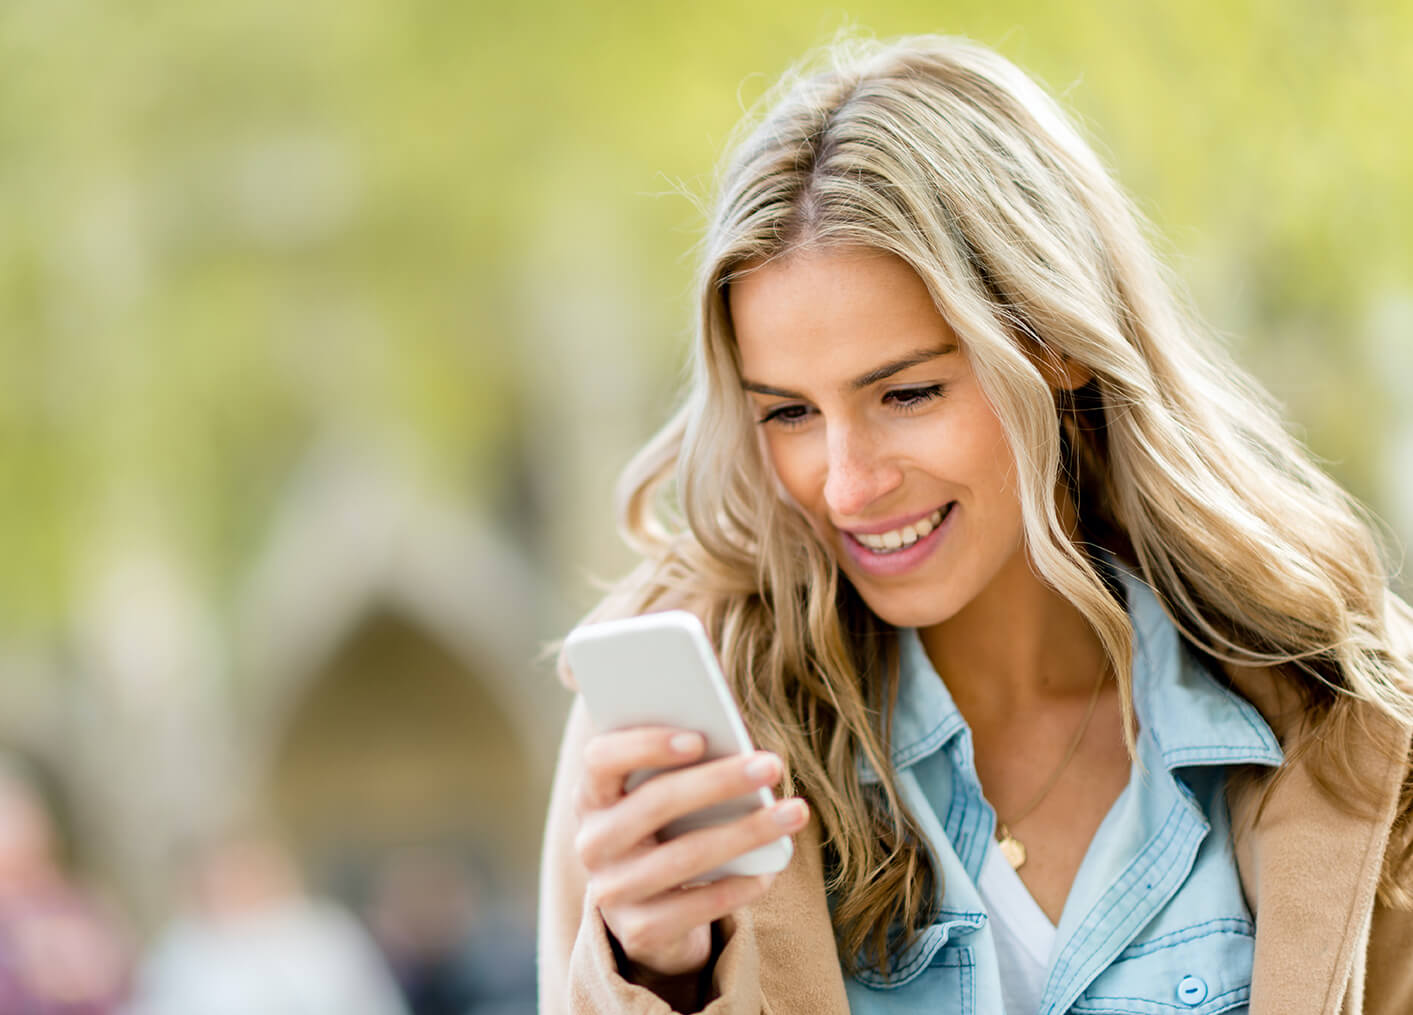 Blonde client standing outdoors and smiling at SMS reminder for upcoming meeting